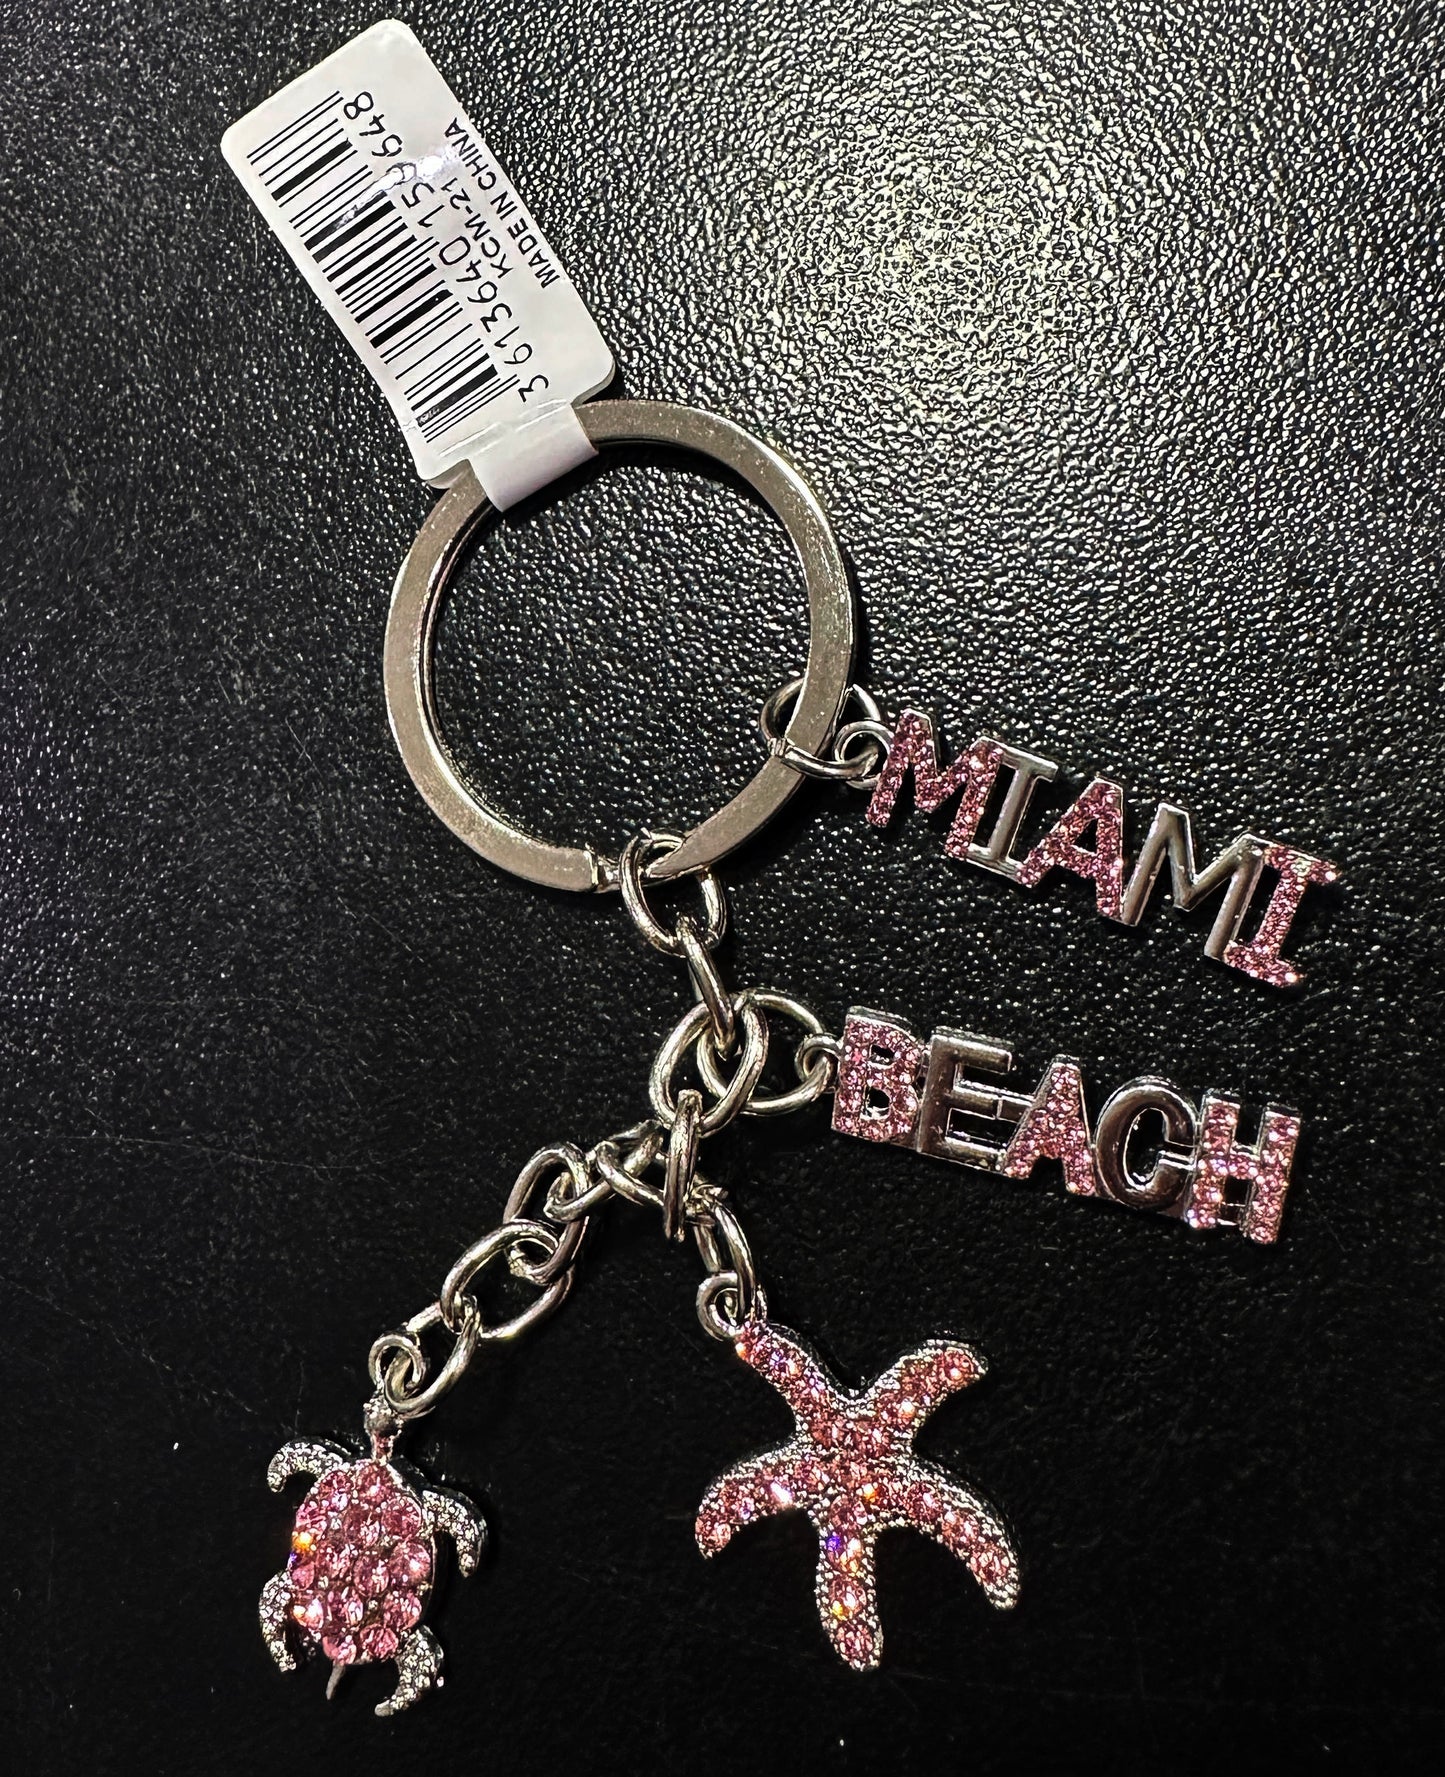 Miami Beach Font and Starfish & Turtle Rhinestone Keychain Fill with Pink Stones - Miami Key Ring Travel Souvenir Gift- Multicolor 3"